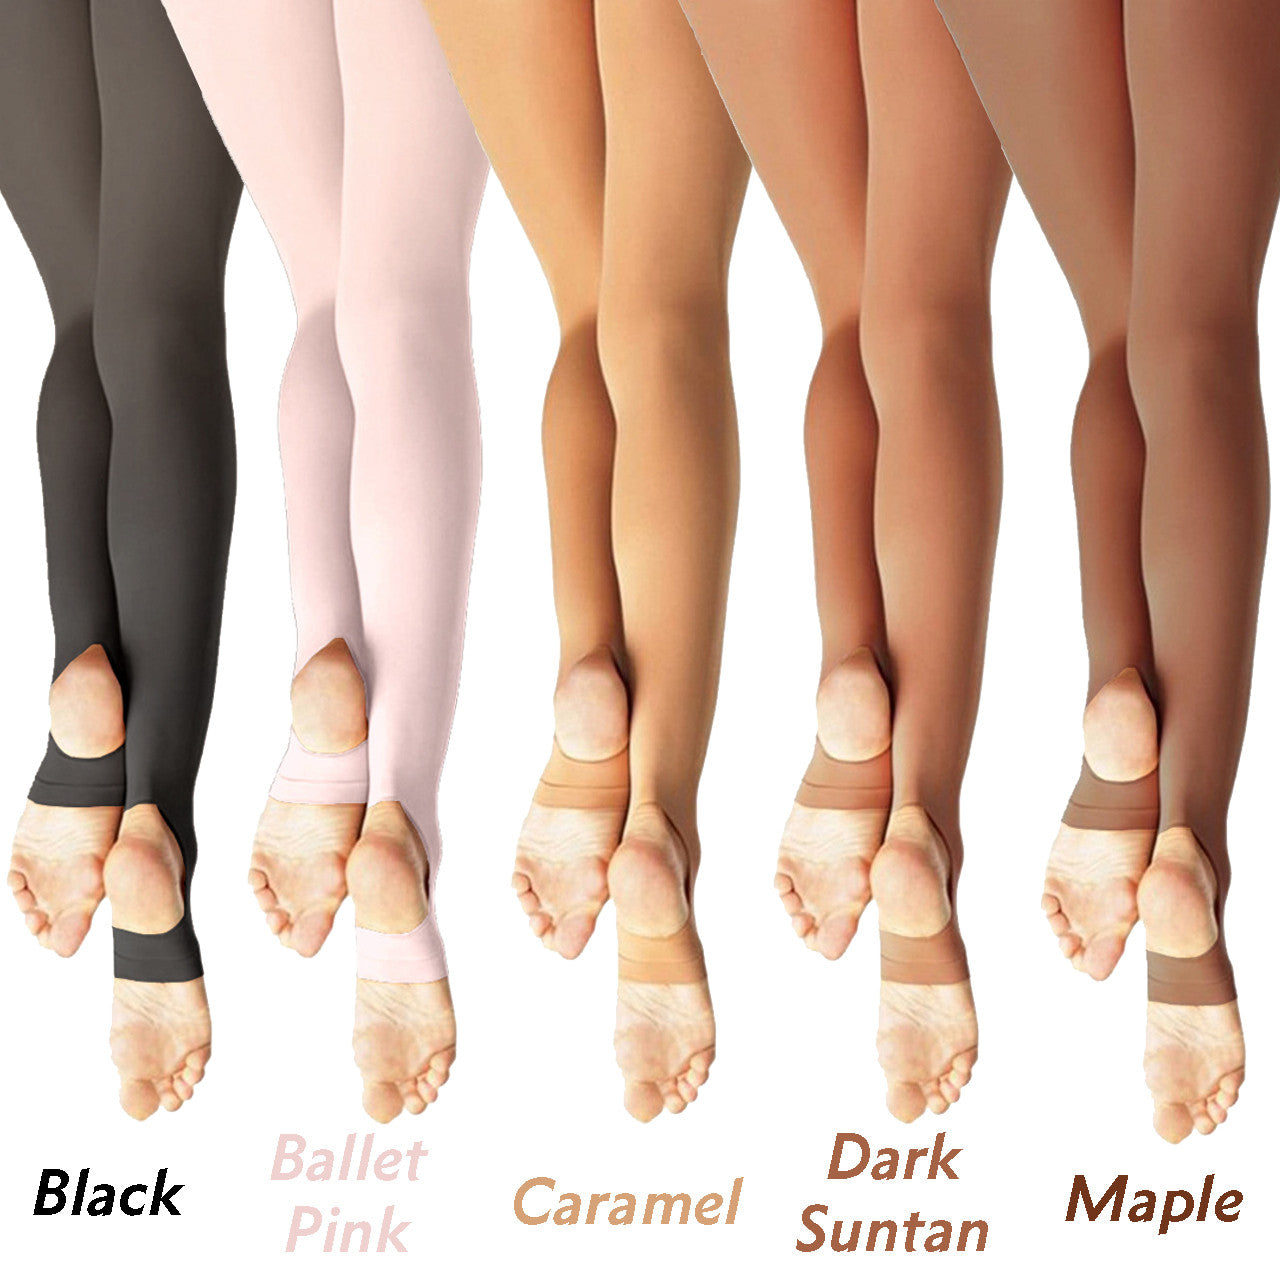 Capzio Capezio Hold and Stretch Footless Tights - Black